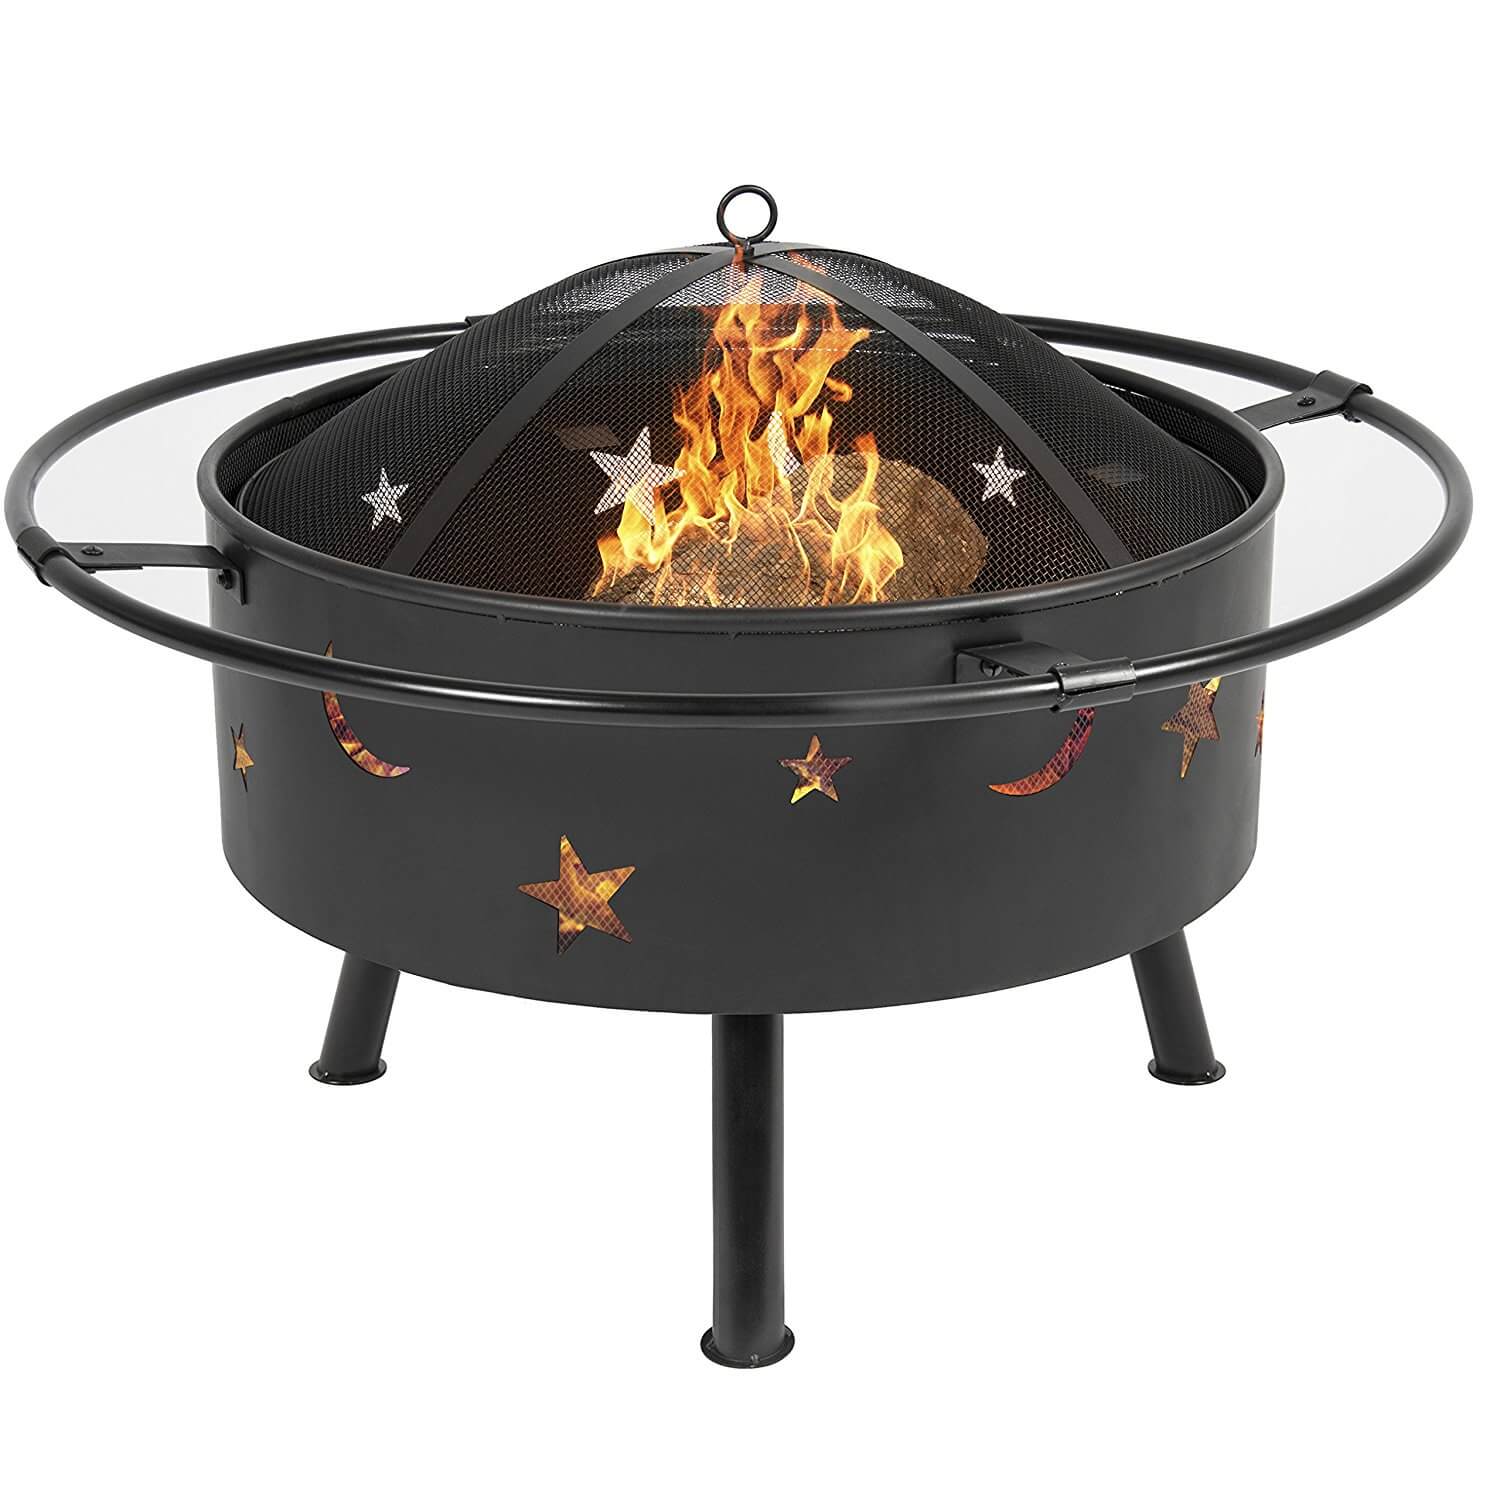 30 Inch Patio Fire Pit Grill